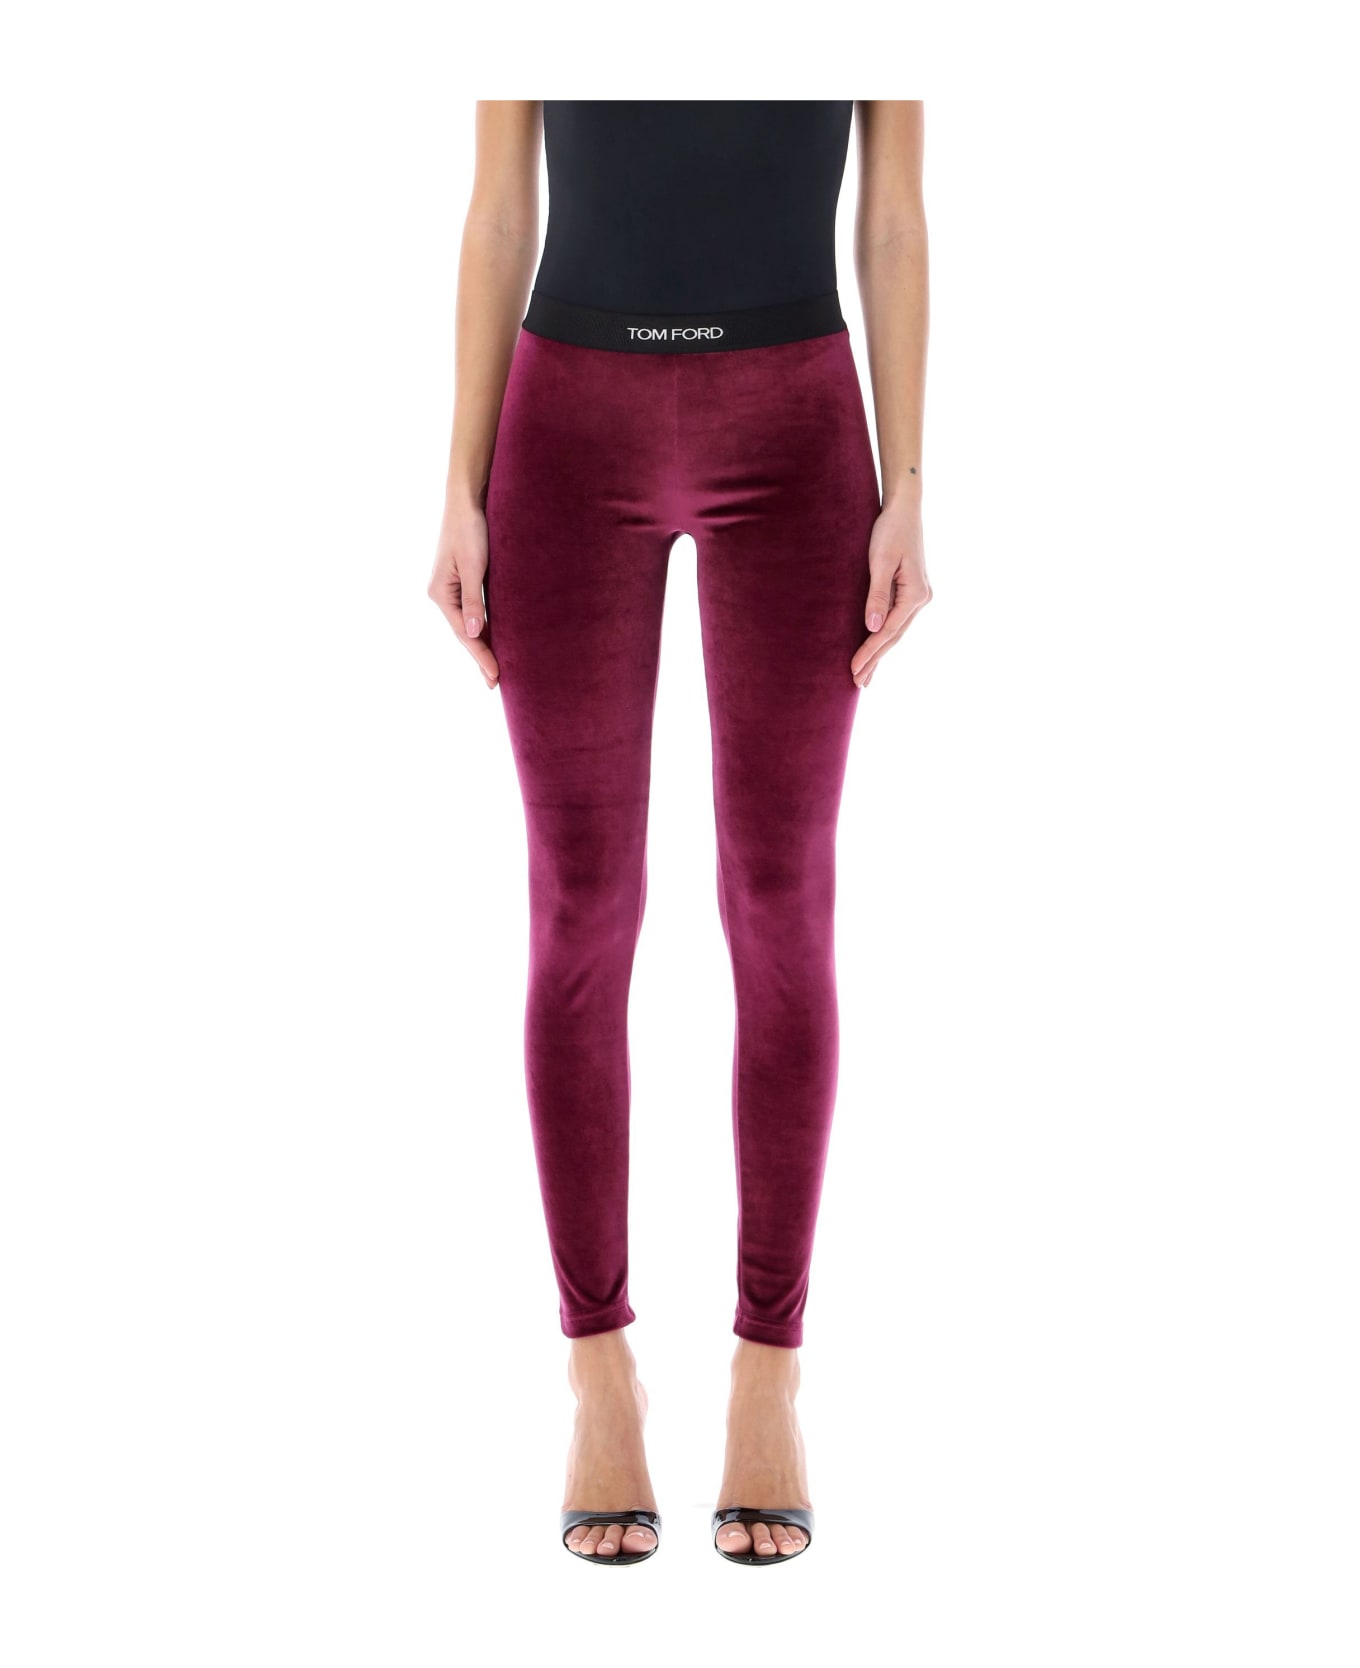 Score these Tom ford leggings for $157! Link in bio